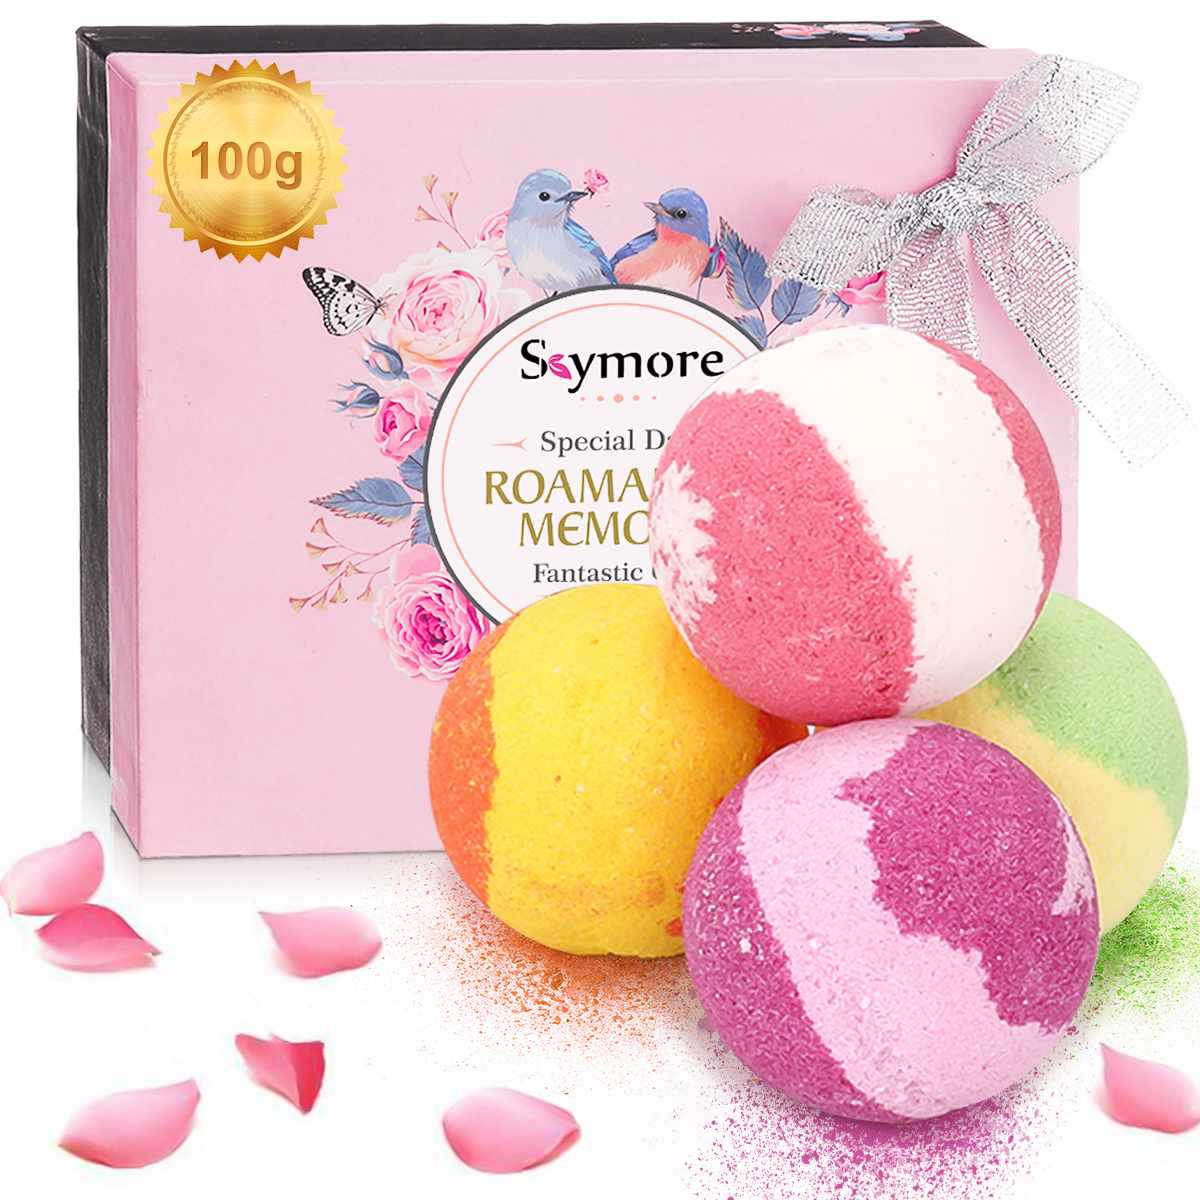 4PCS Round Bath Bomb Molds DIY Tool Bath Salt Ball Aromatherapy Type Body Cleaner Homemade Crafting Gifts Home Hotel Bathroom